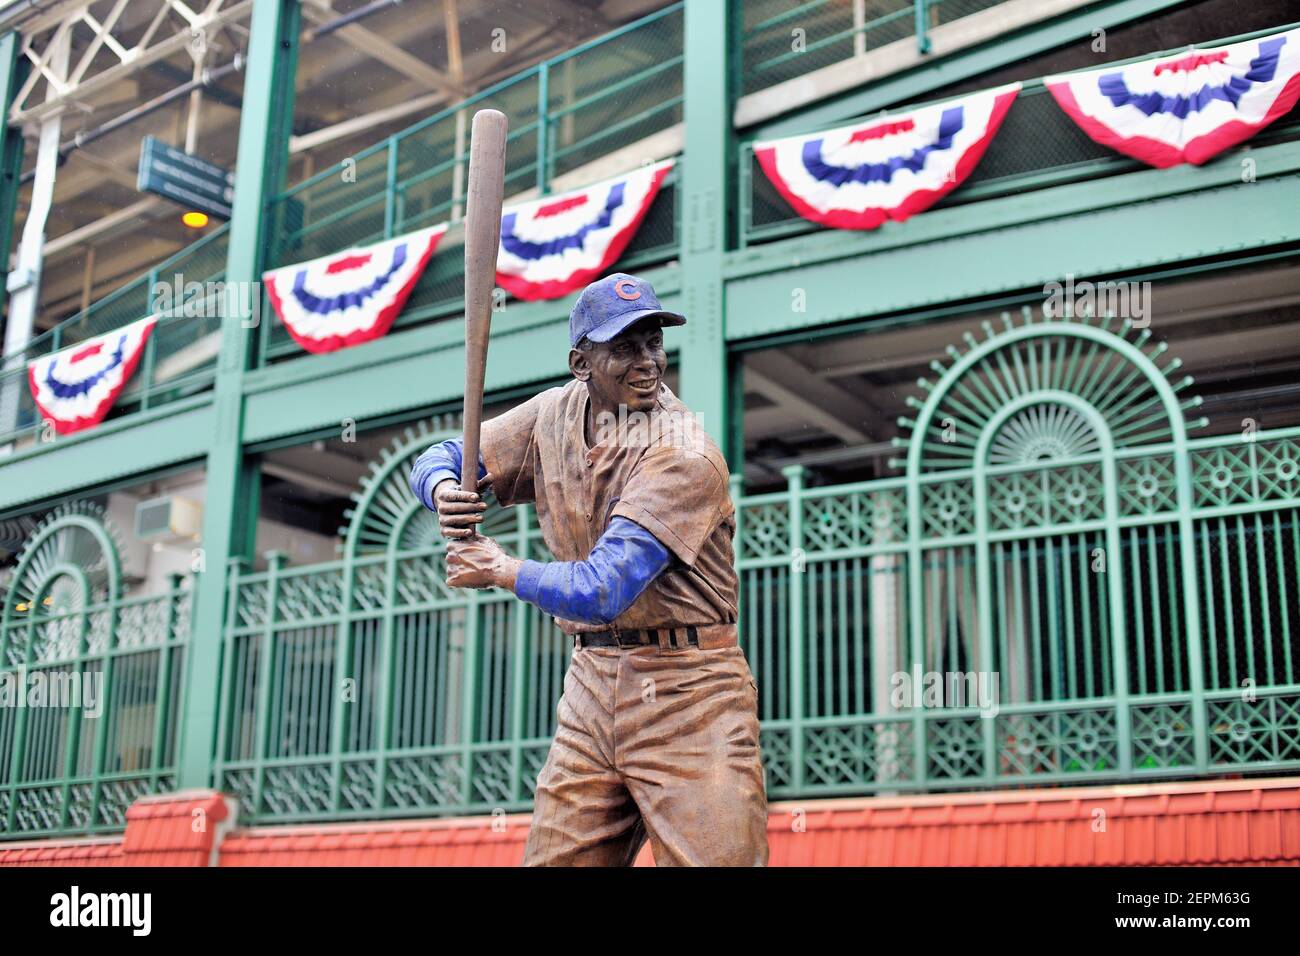 Chicago, Illinois, USA. On the day of Game 7 of the 2016 World Series rain drops lingered on the statue of Hall-of-Fame Cubs' player Ernie Banks. Stock Photo